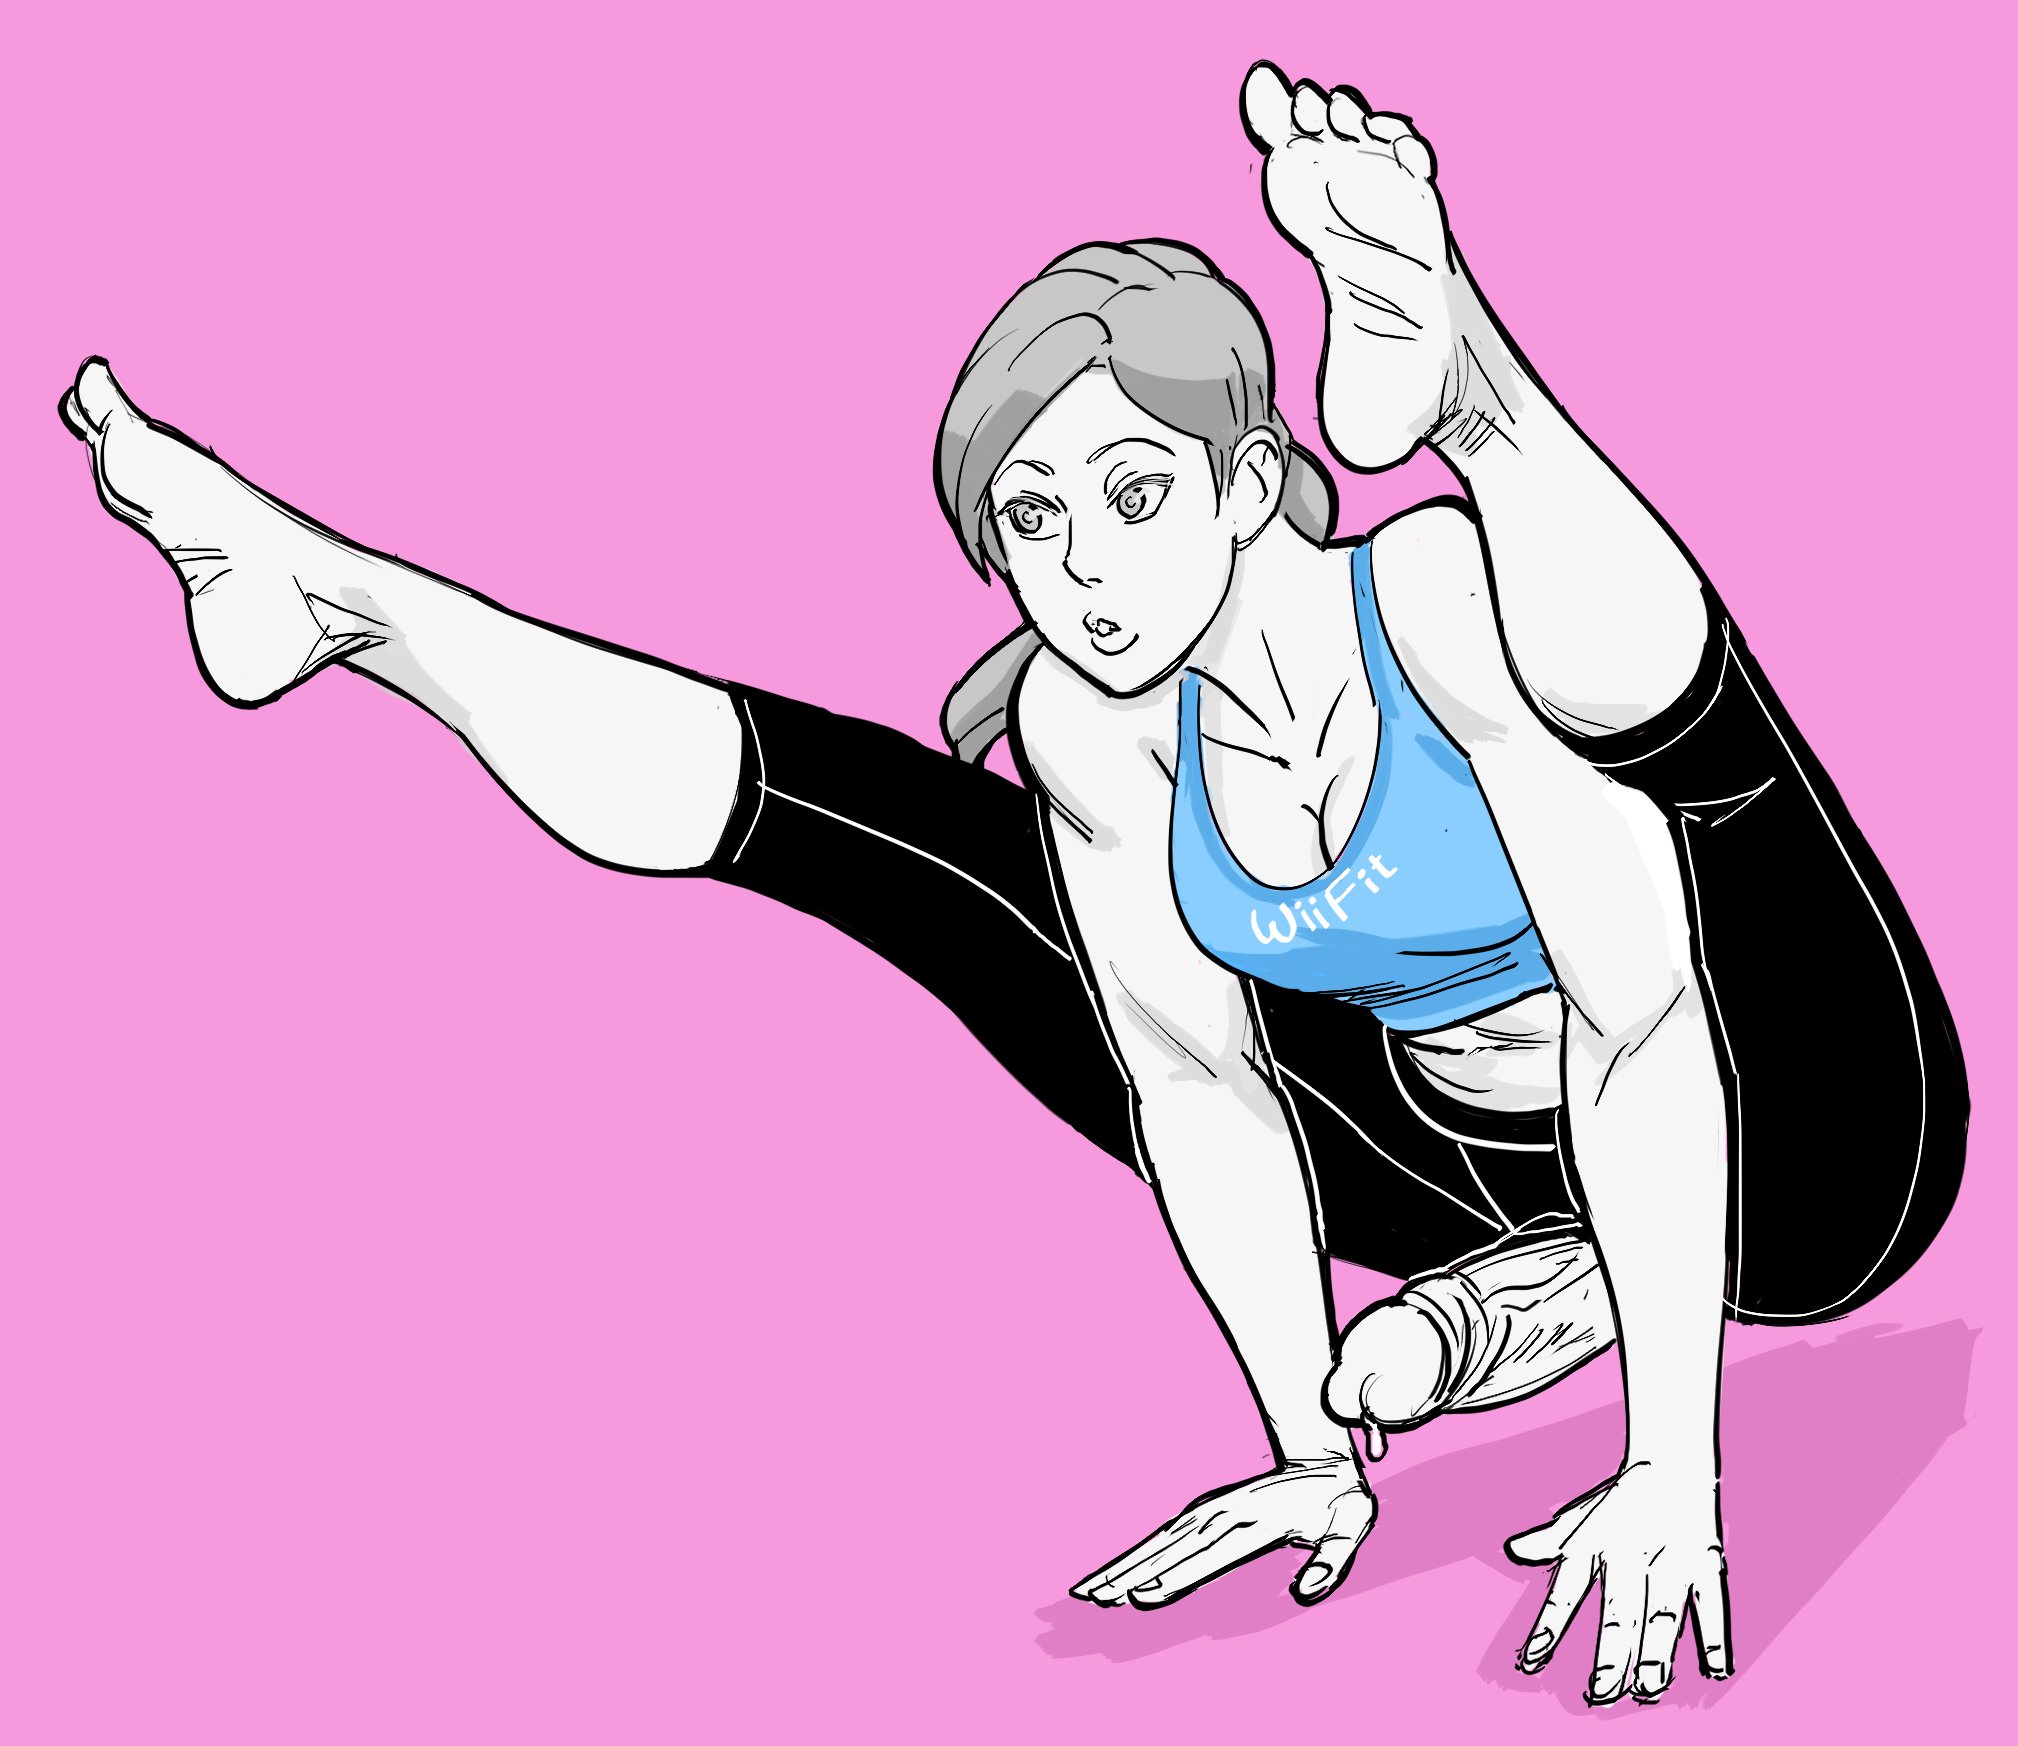 â€œPatreon request: Wii Fit trainer exercising with her futa cock hanging out...